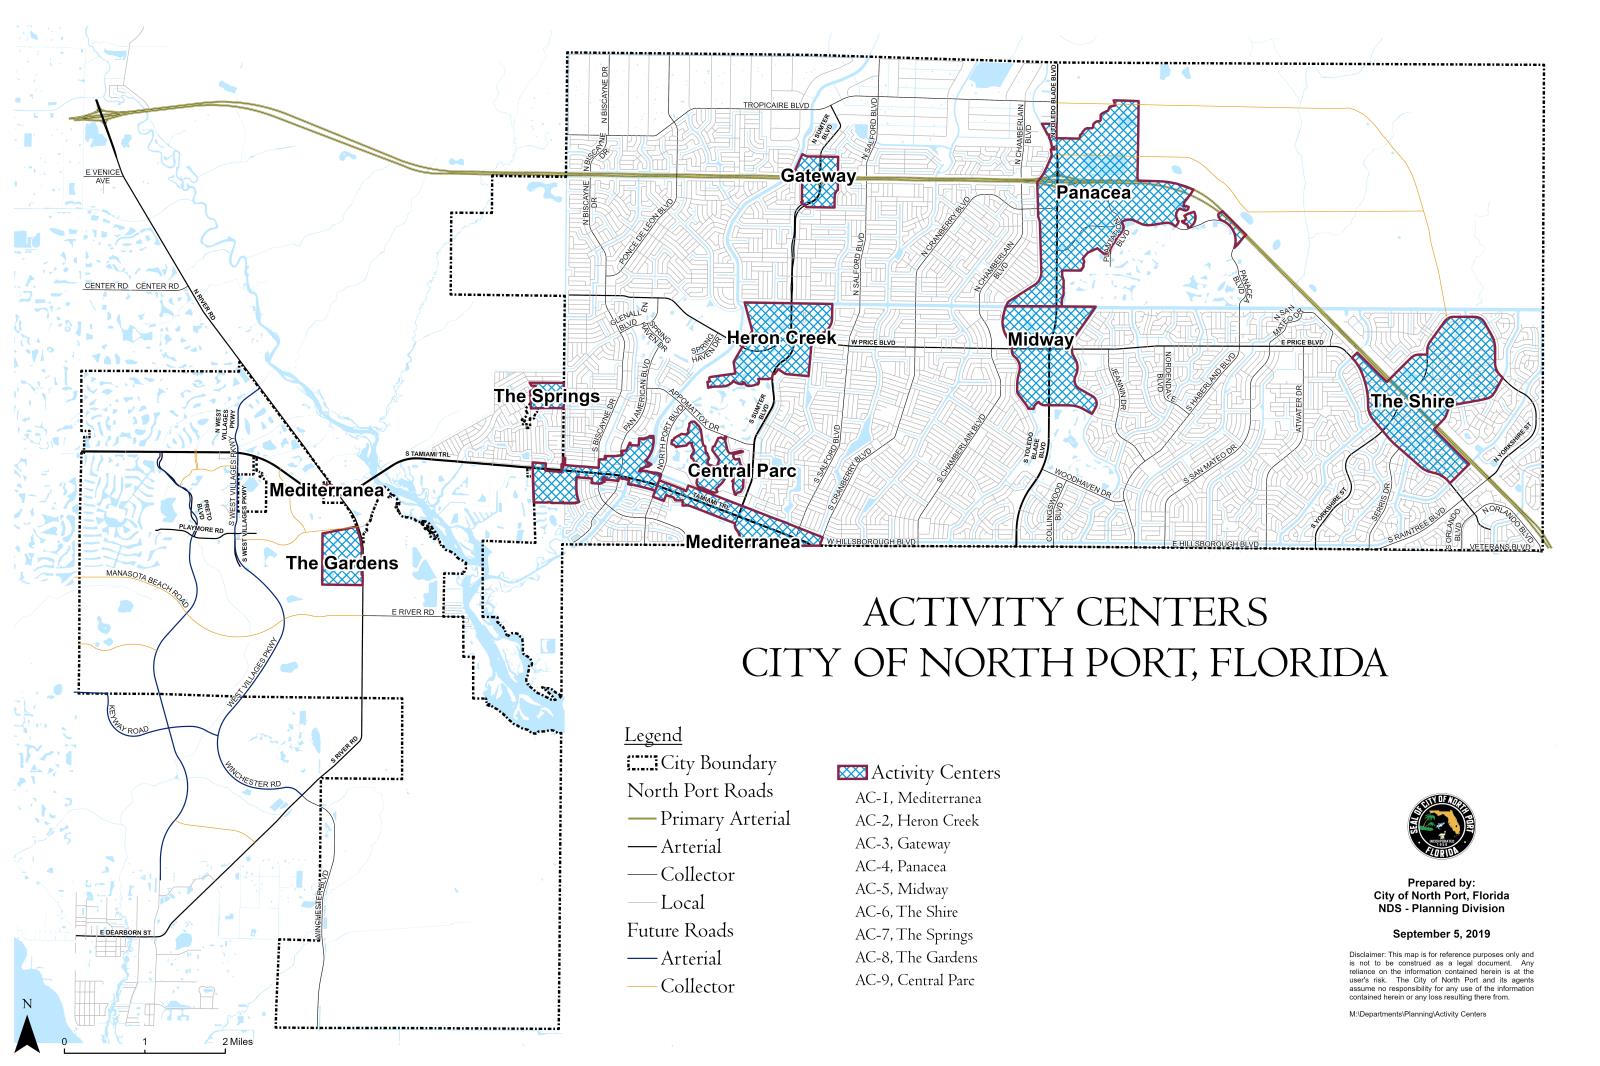 North Port Activity Centers map